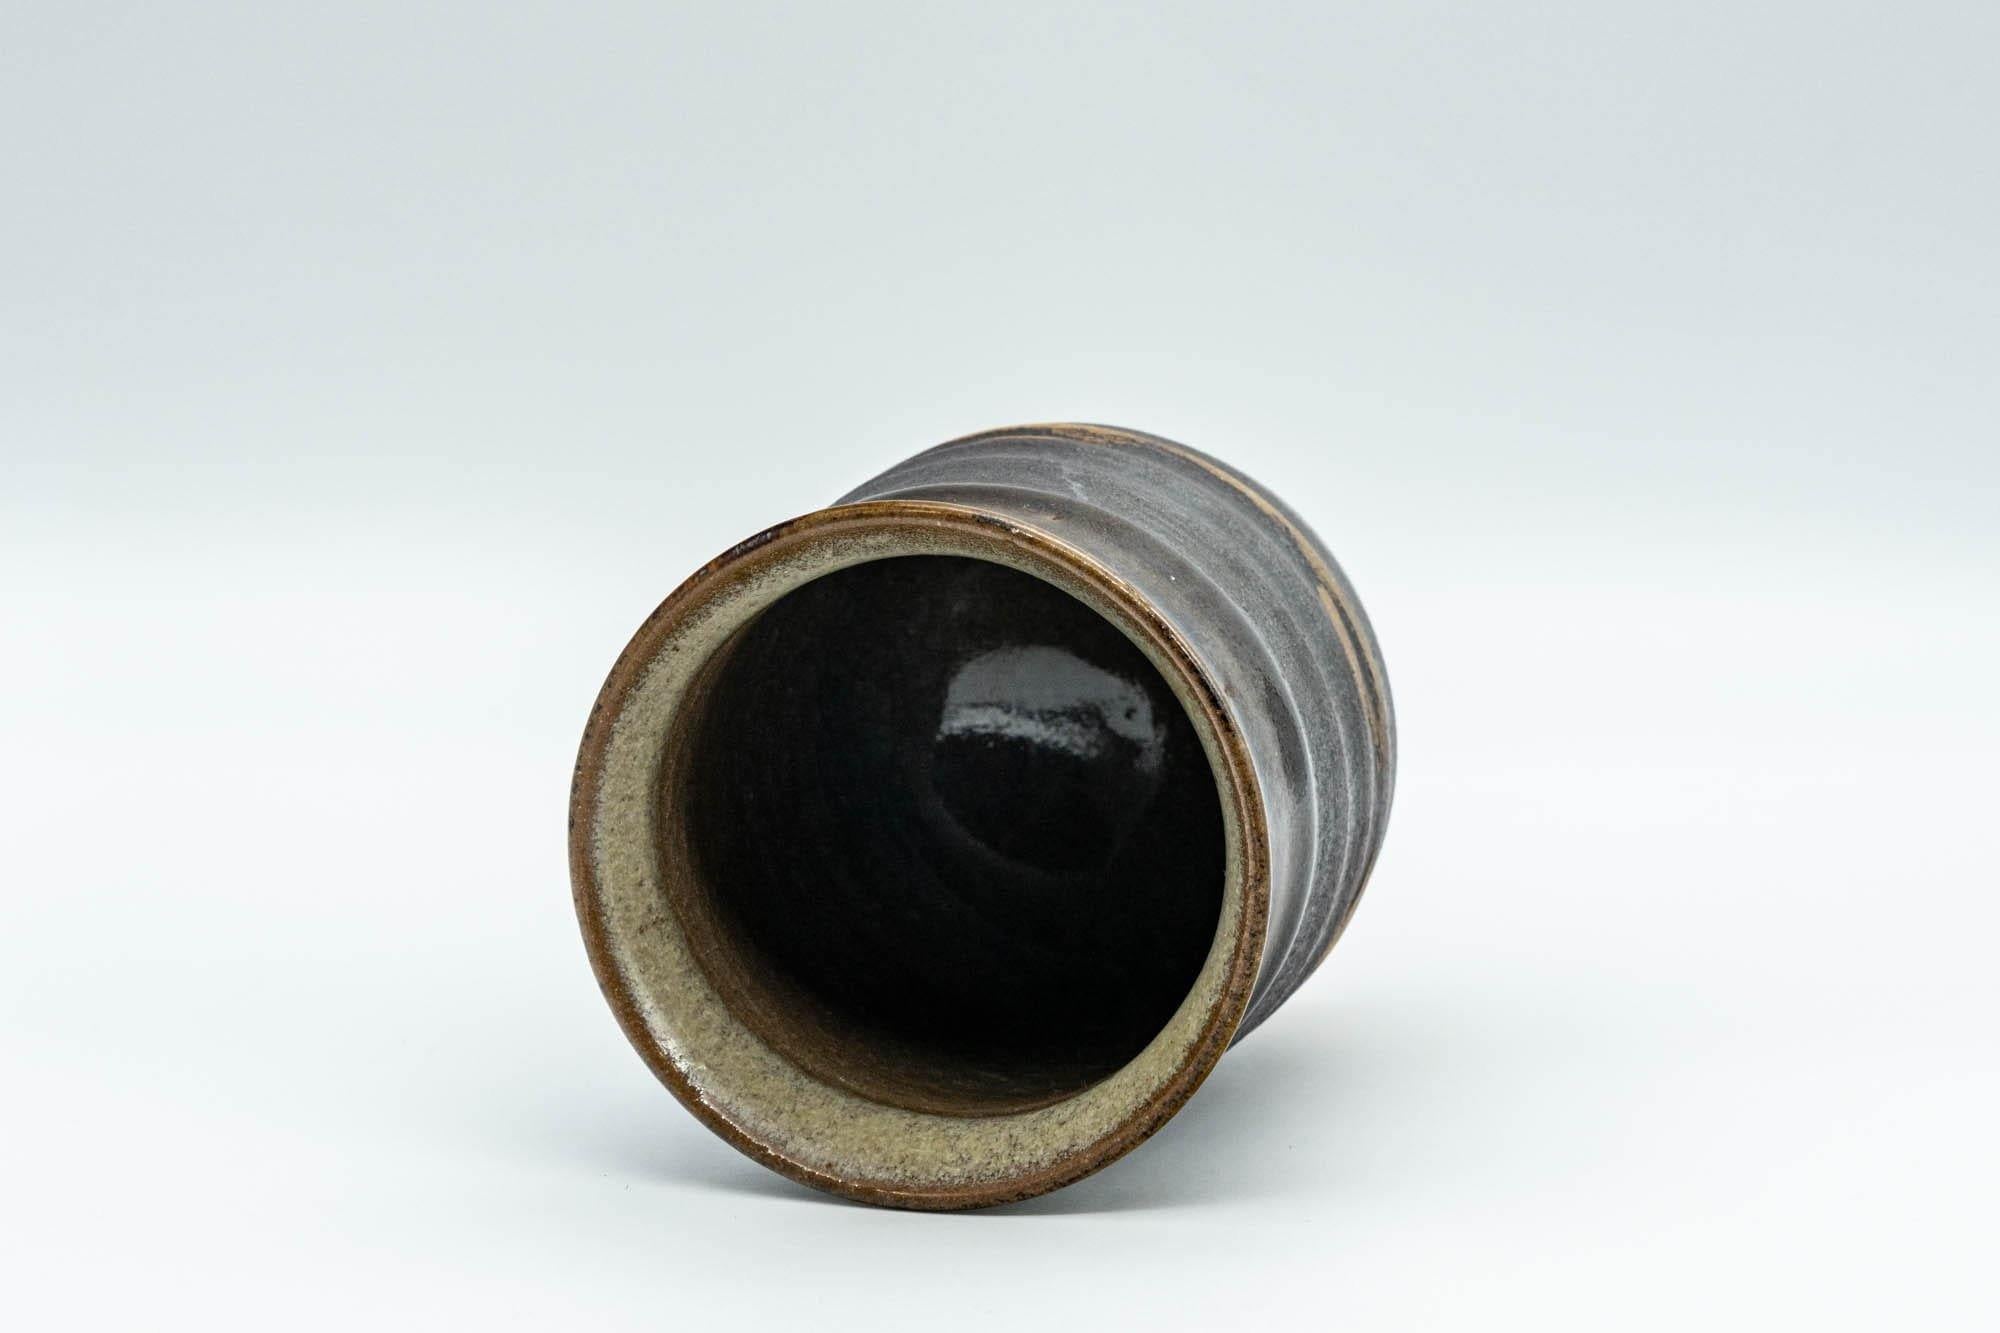 Japanese Teacup - Brown Glossy and Matte Glazed Yunomi - 150ml - Tezumi